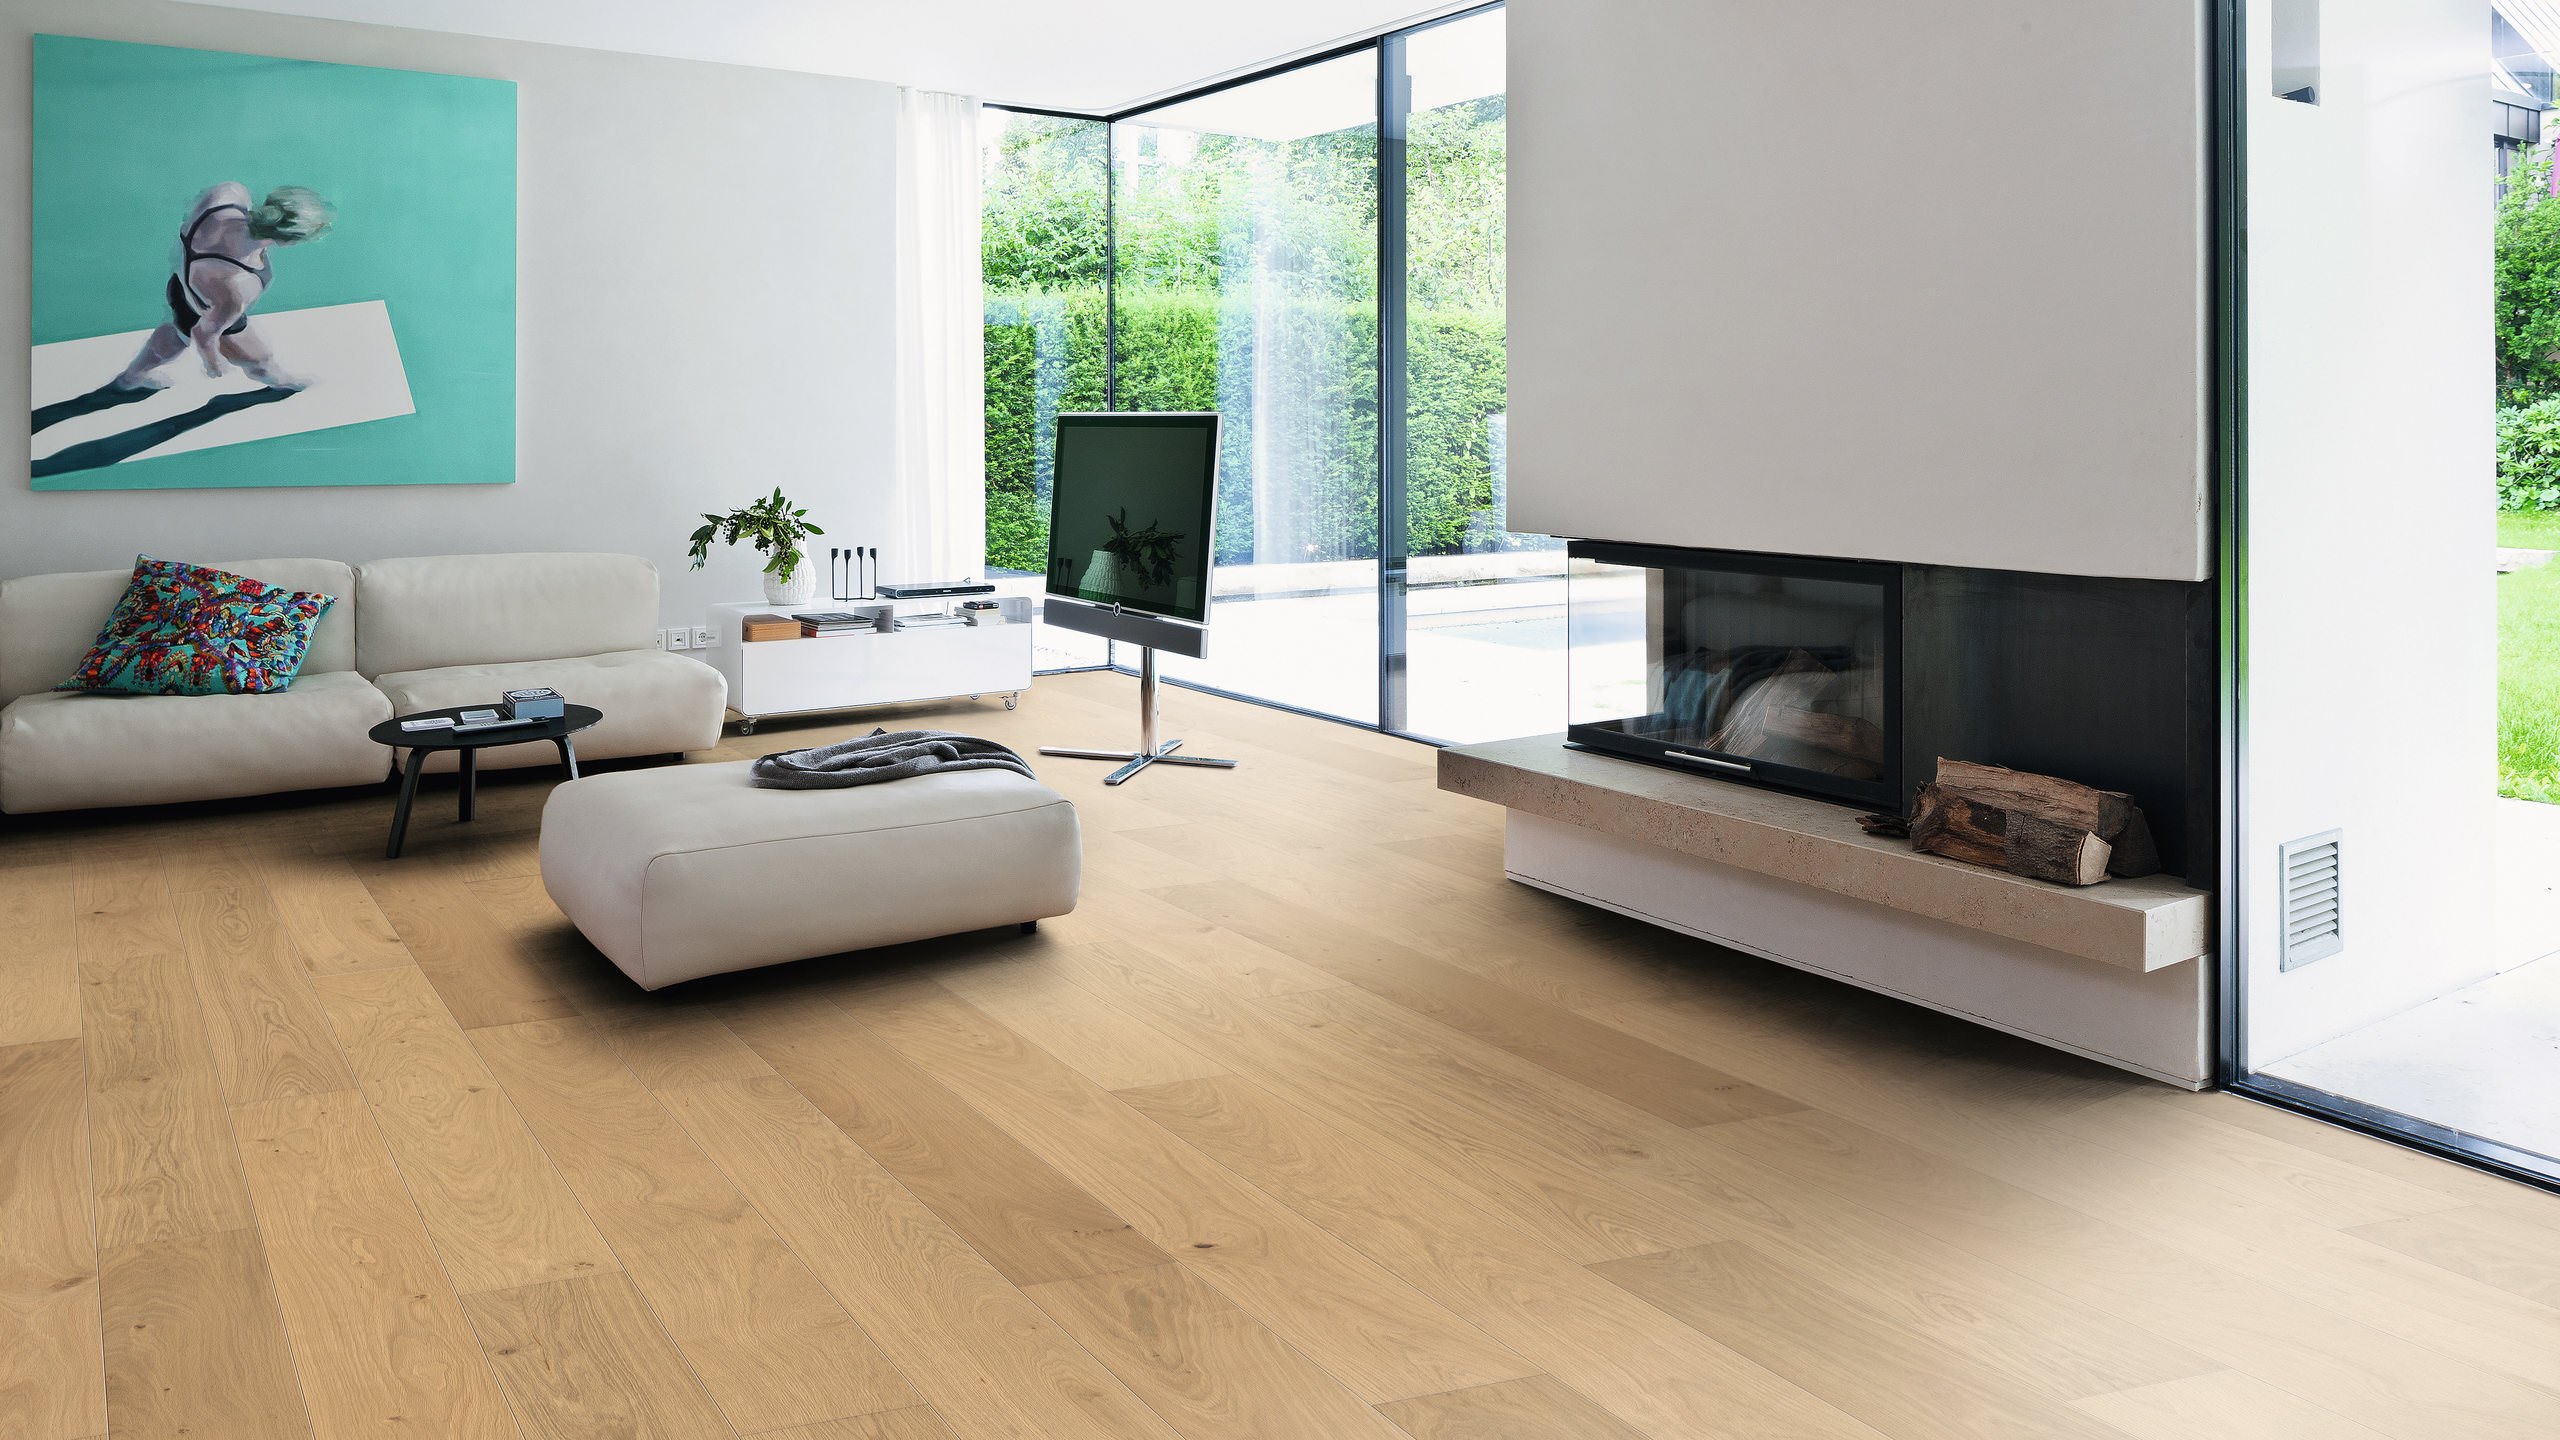 HARO PARQUET 4000 Plank 1-Strip 180 4V Oak Invisible Markant brushed naturaLin plus Top Connect